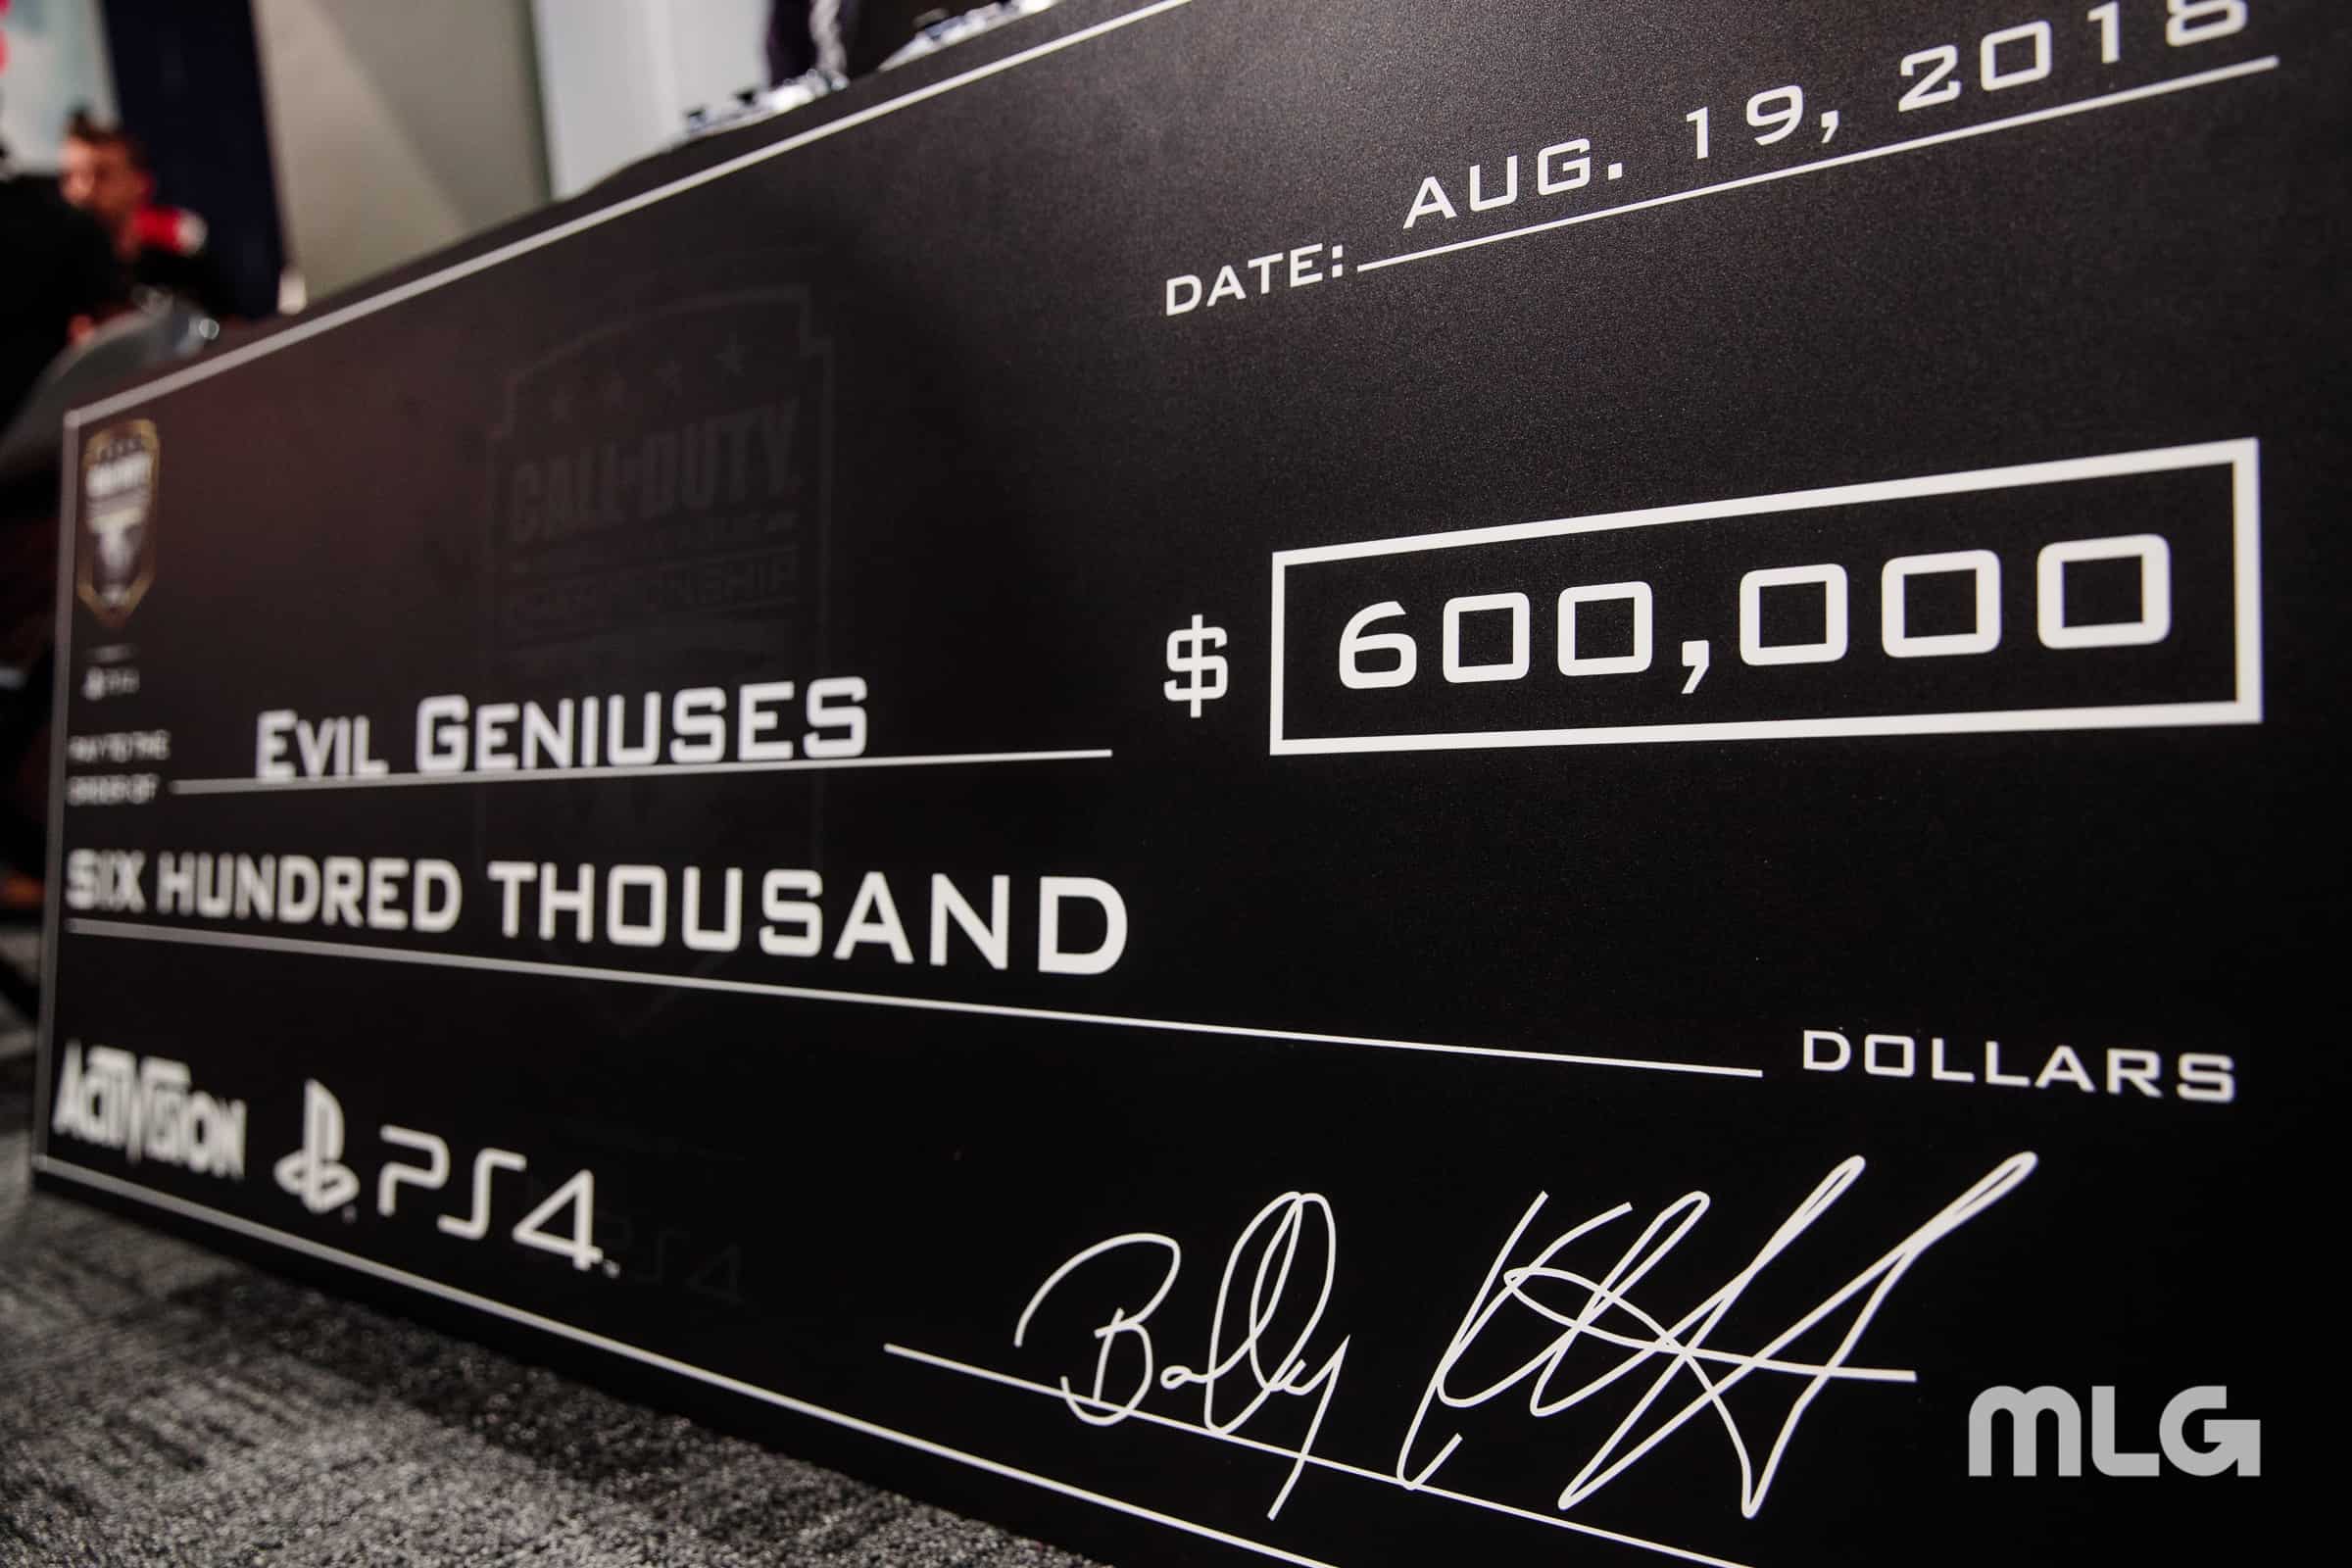 How Do Professional Gamers Make Money? Teknos